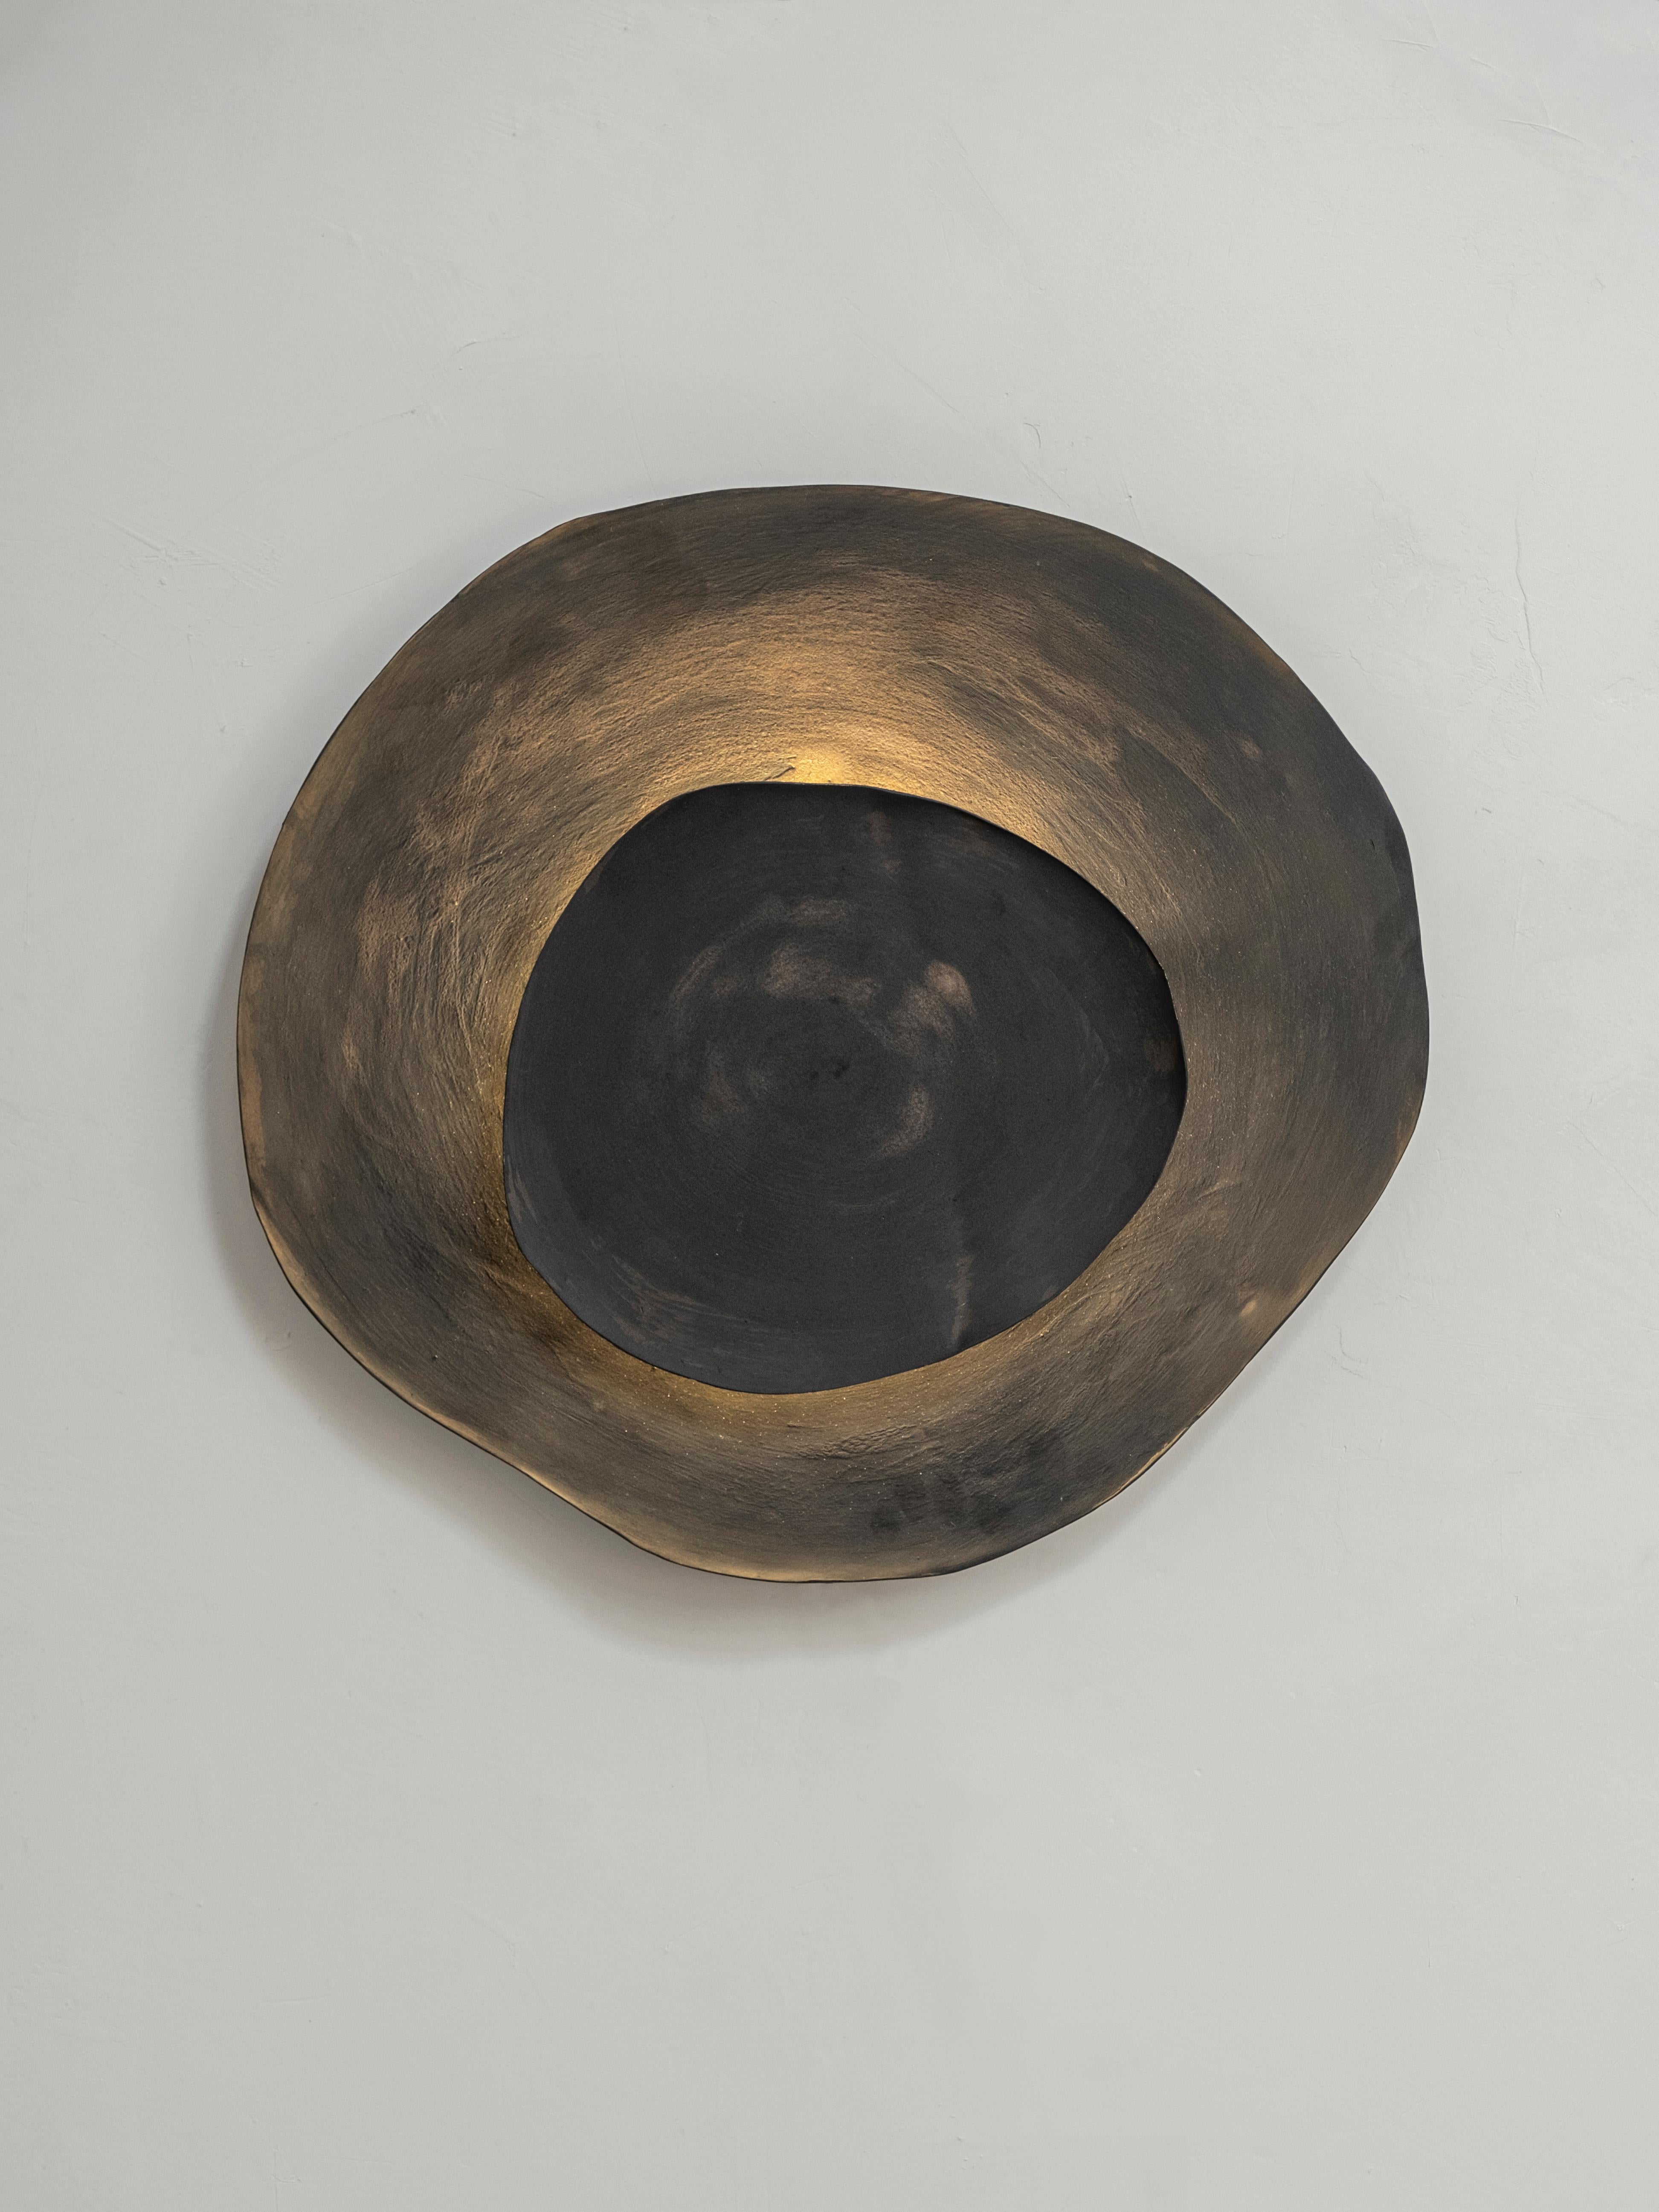 Ash #8 wall light by Margaux Leycuras.
One of a Kind, Signed and numbered.
Dimensions: Ø44 x H40 cm.
Material: Ceramic, black stoneware with burnished gold glaze.
The piece is signed, numbered and delivered with a certificate of